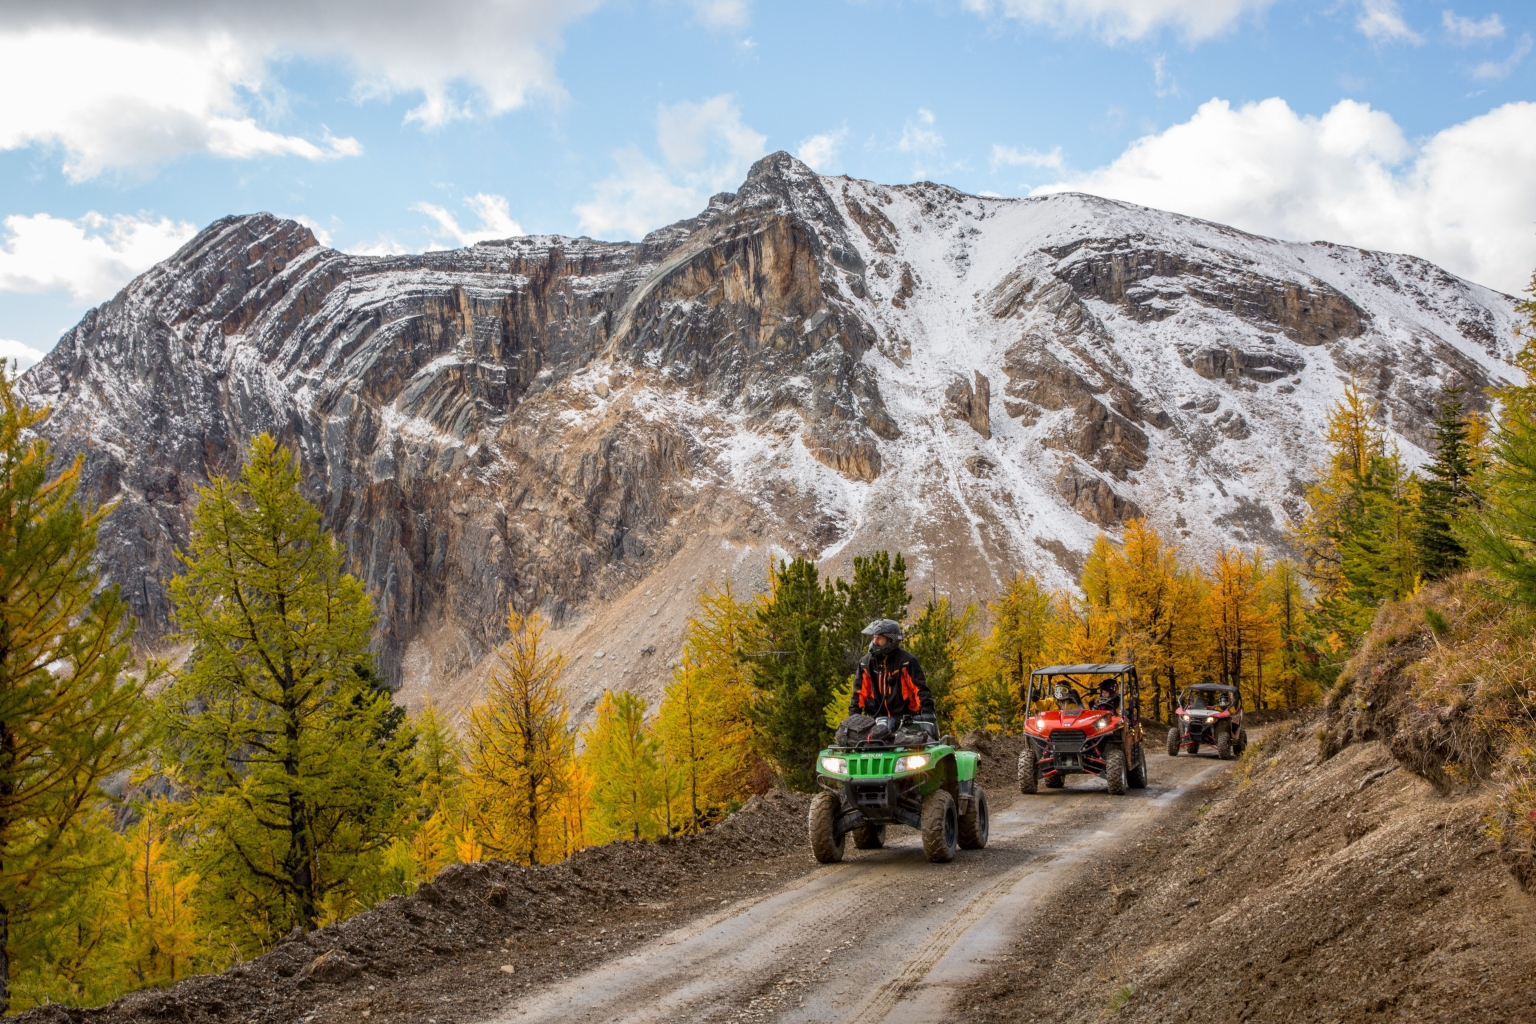 ATV & SXS tour through the spectacular Paradise Basin larch forest at Toby Creek Adventures in Panorama.